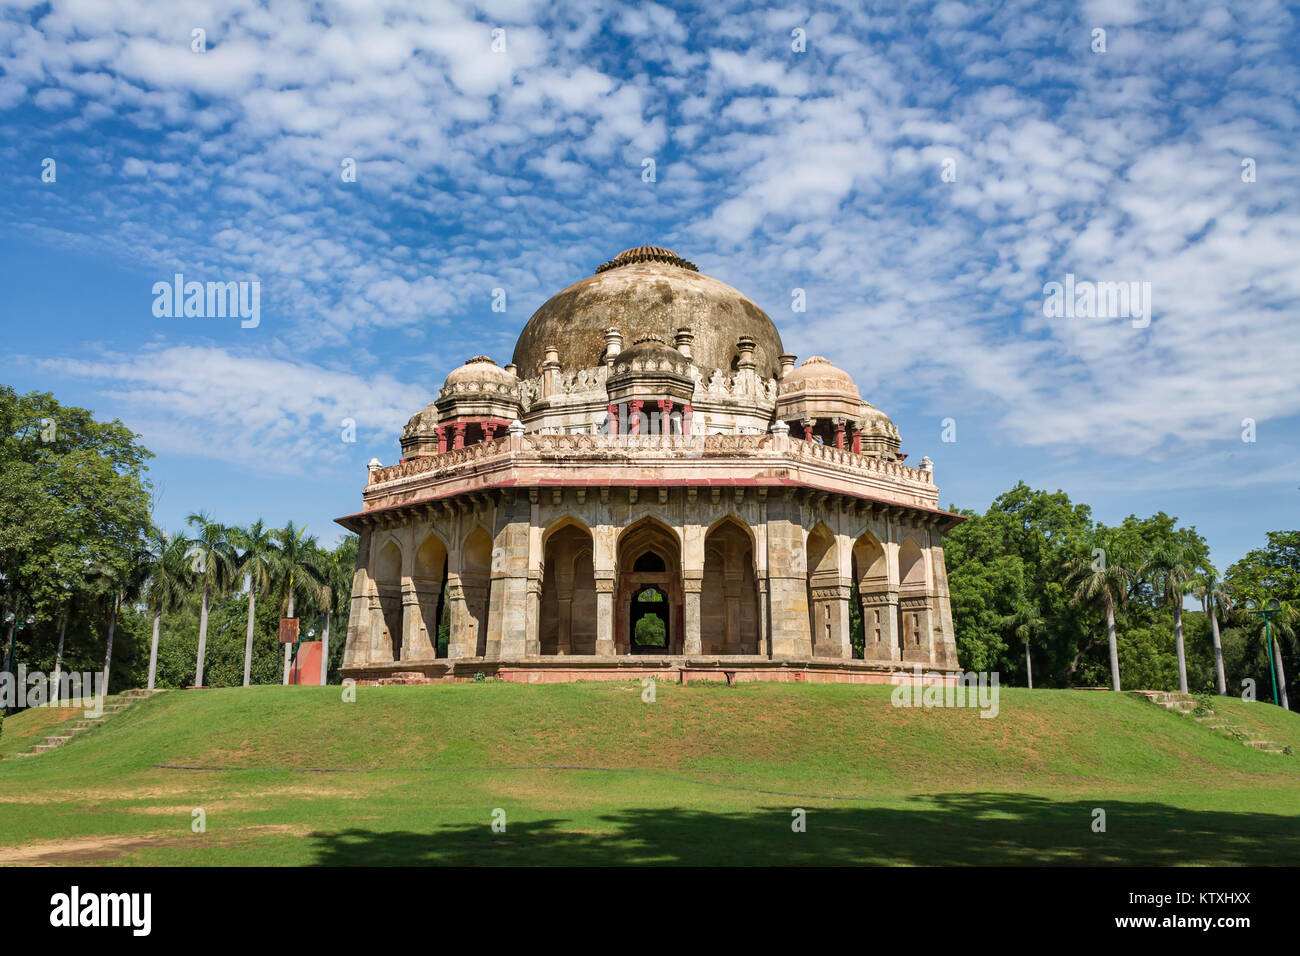 New Delhi , India- September 01, 2014 A Overall View Of Mohammed Shah's Tomb At Lodhi Garden Under Blue Clouds Stock Photo